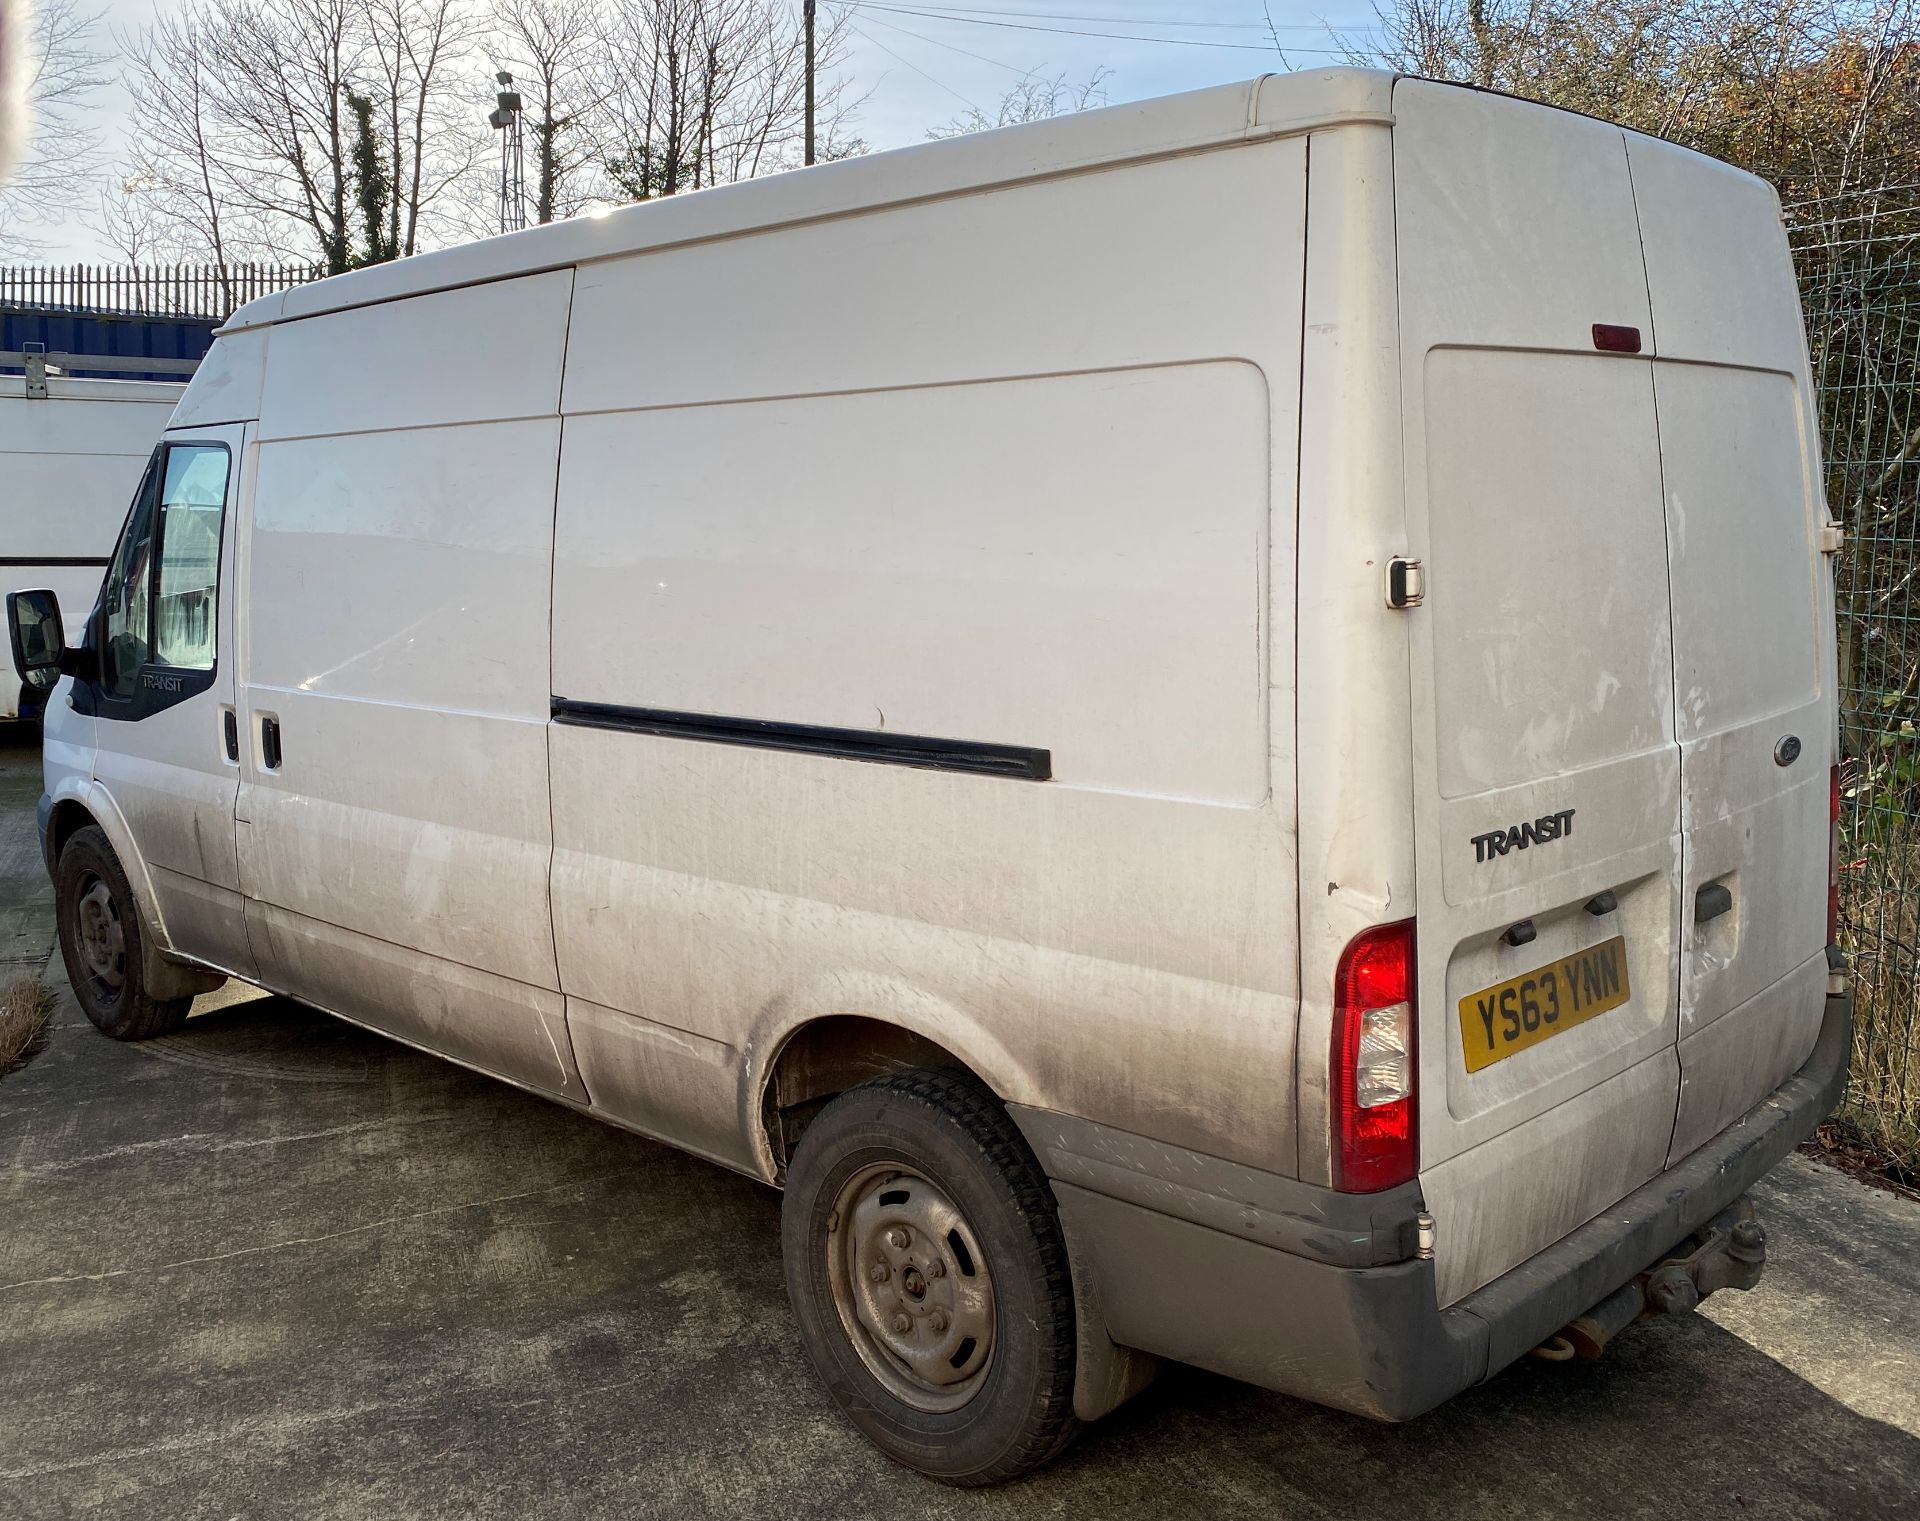 FORD TRANSIT T280 DURATORQ PANEL VAN (listed on HPI as a 125 T350 FWD) - Diesel - White. - Image 2 of 19